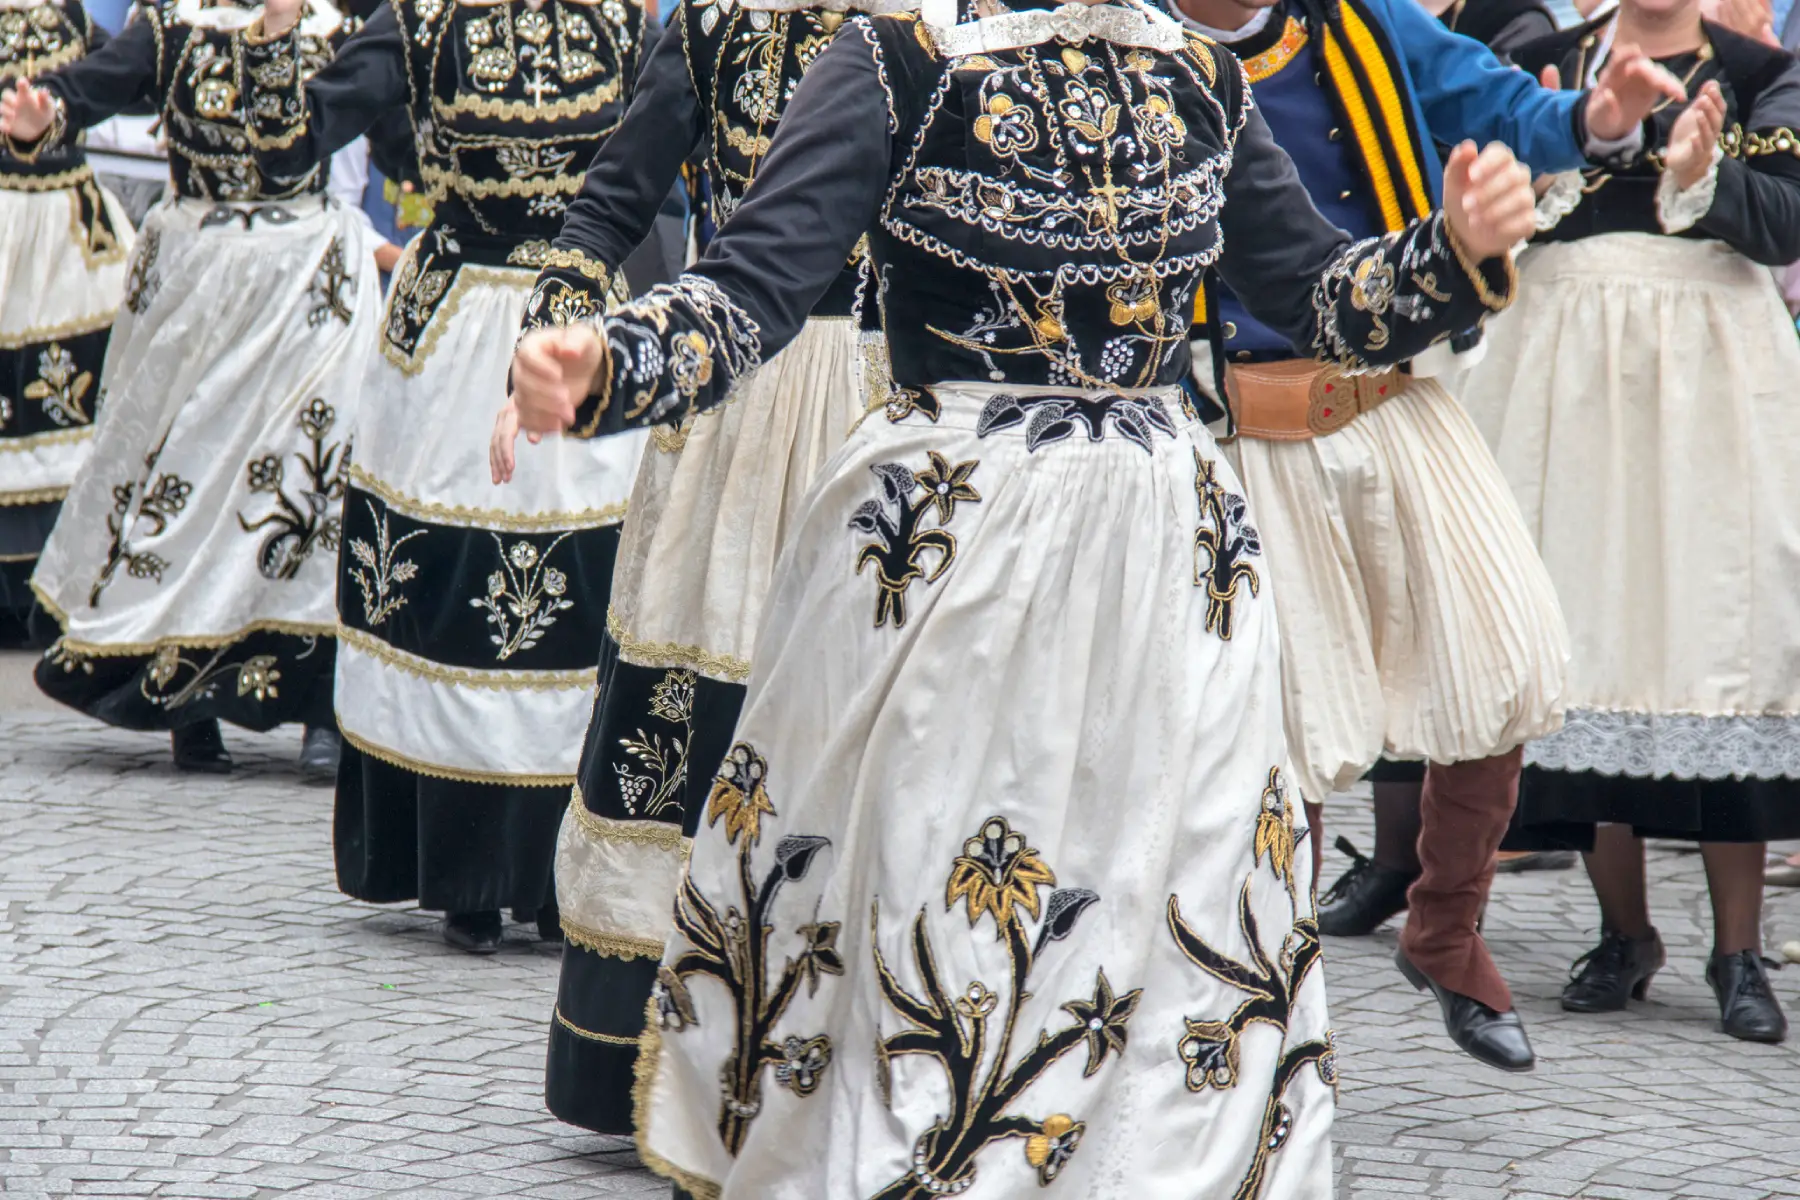 a group of women dressed in black and white folkloric robes dancing along the street at a festival in Brittany